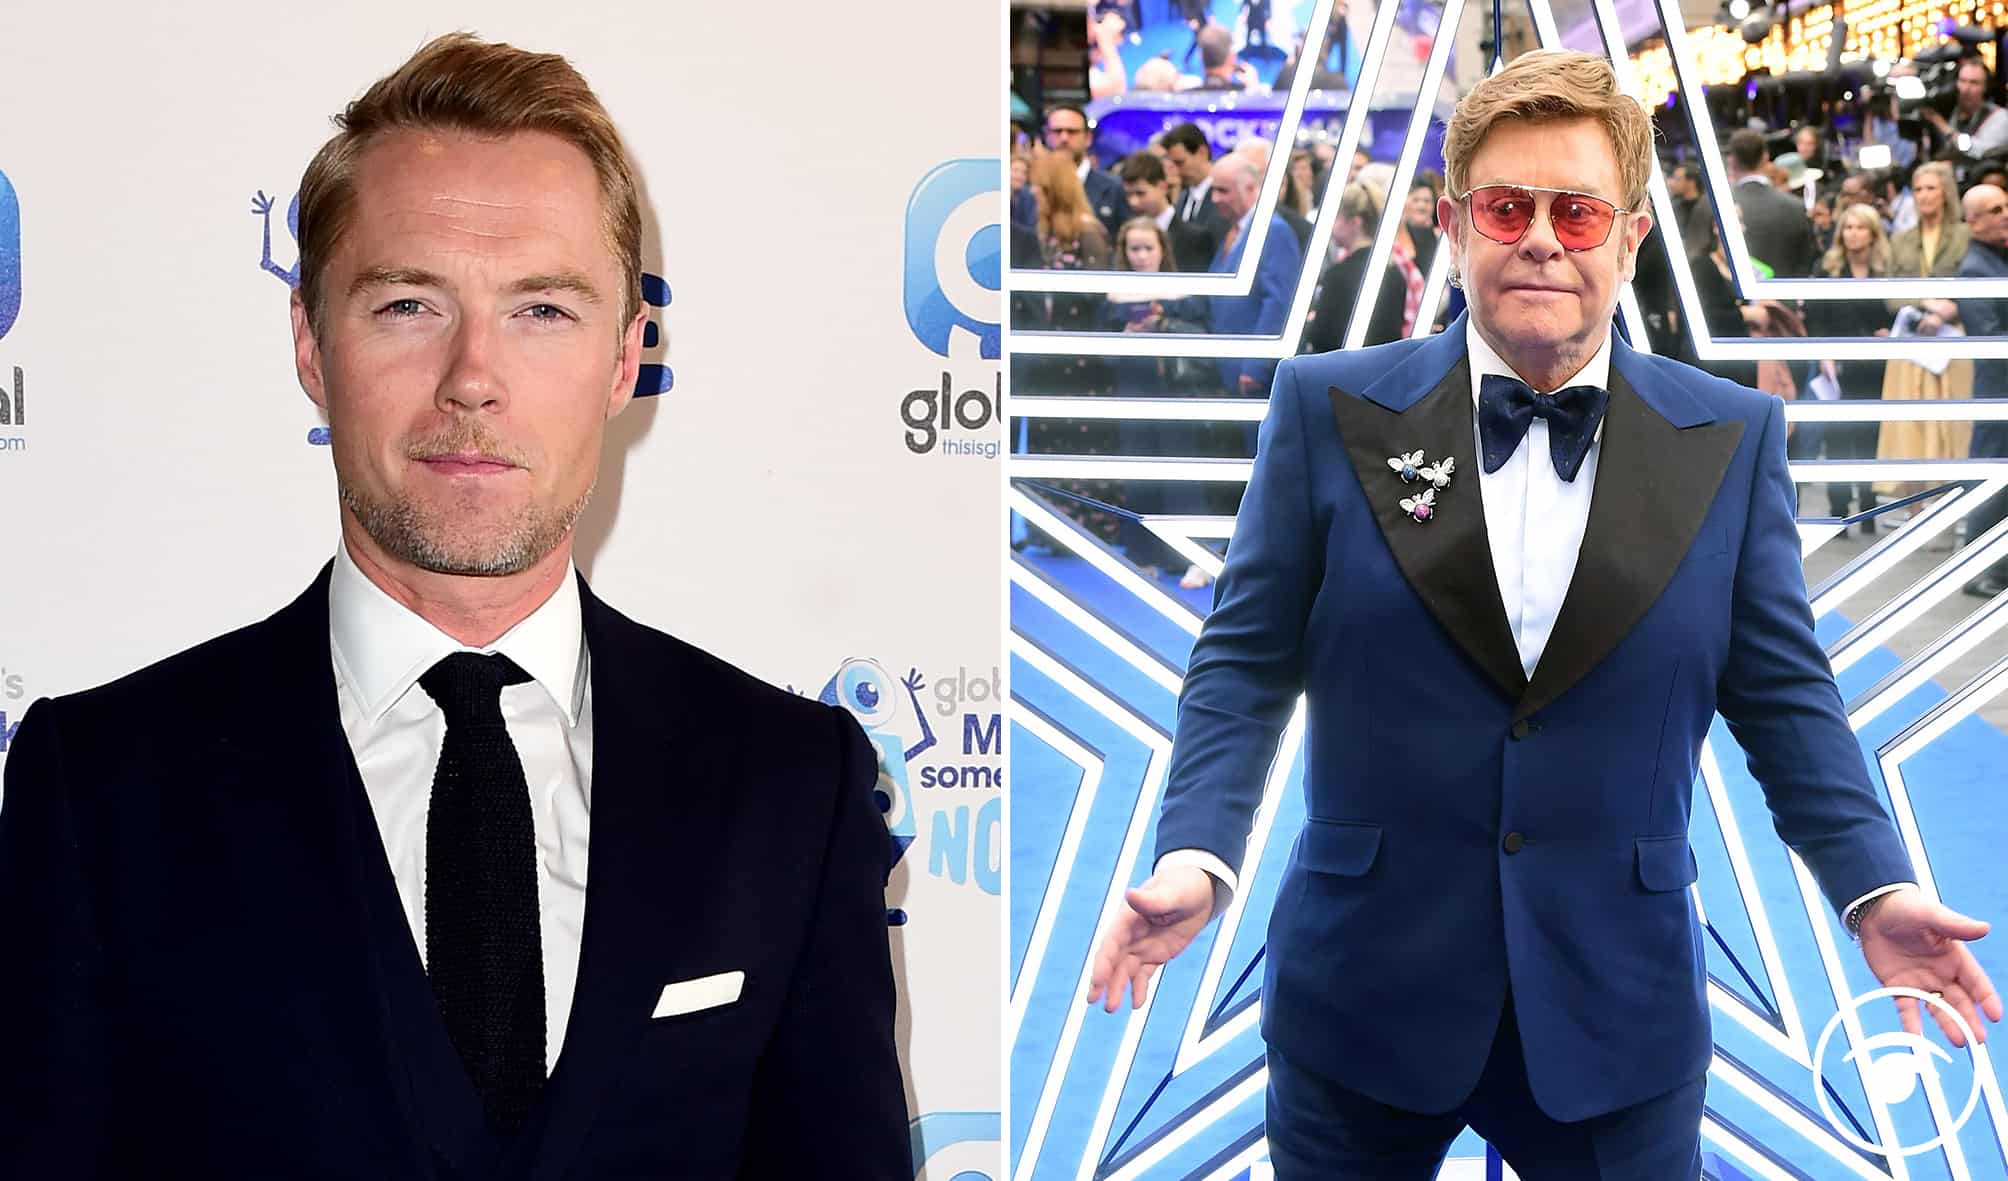 ‘Screwed up’ – Elton John and Ronan Keating slam Brexit deal agreed for British musicians